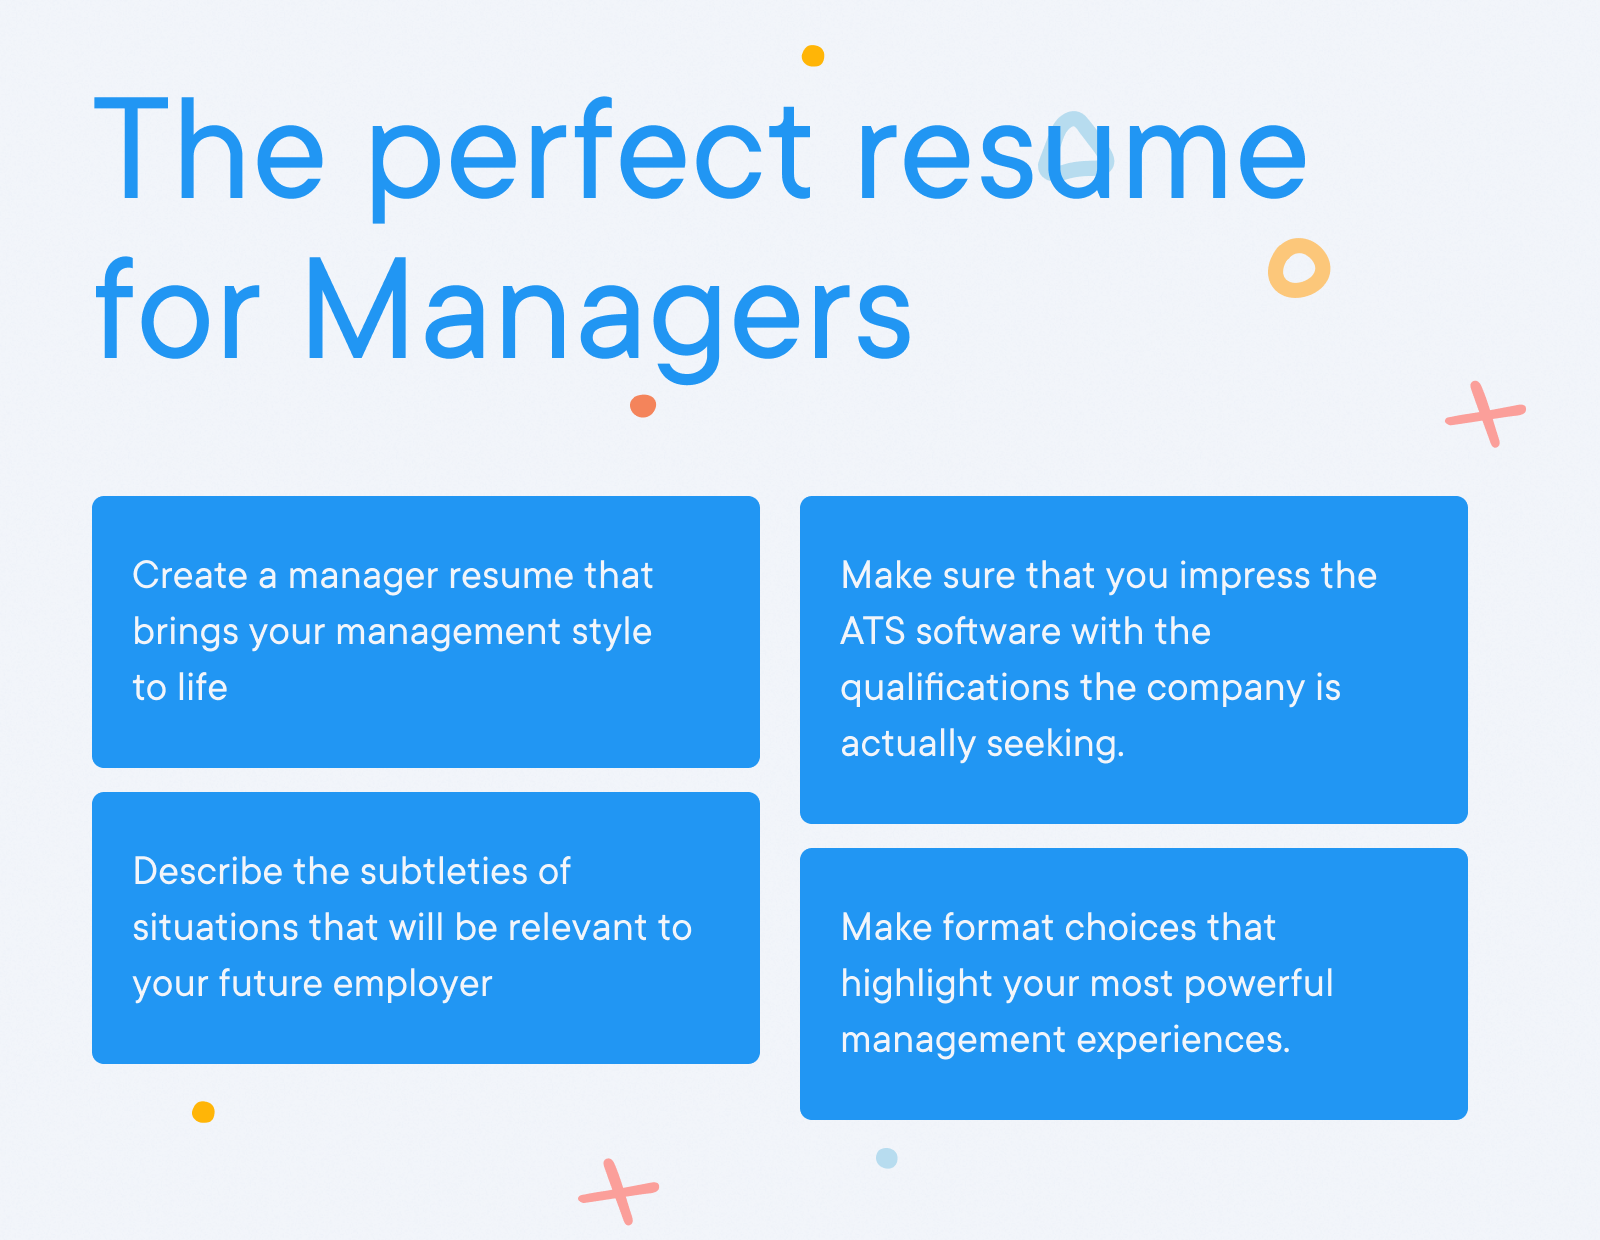 Manager Resume Example - The perfect resume for Managers